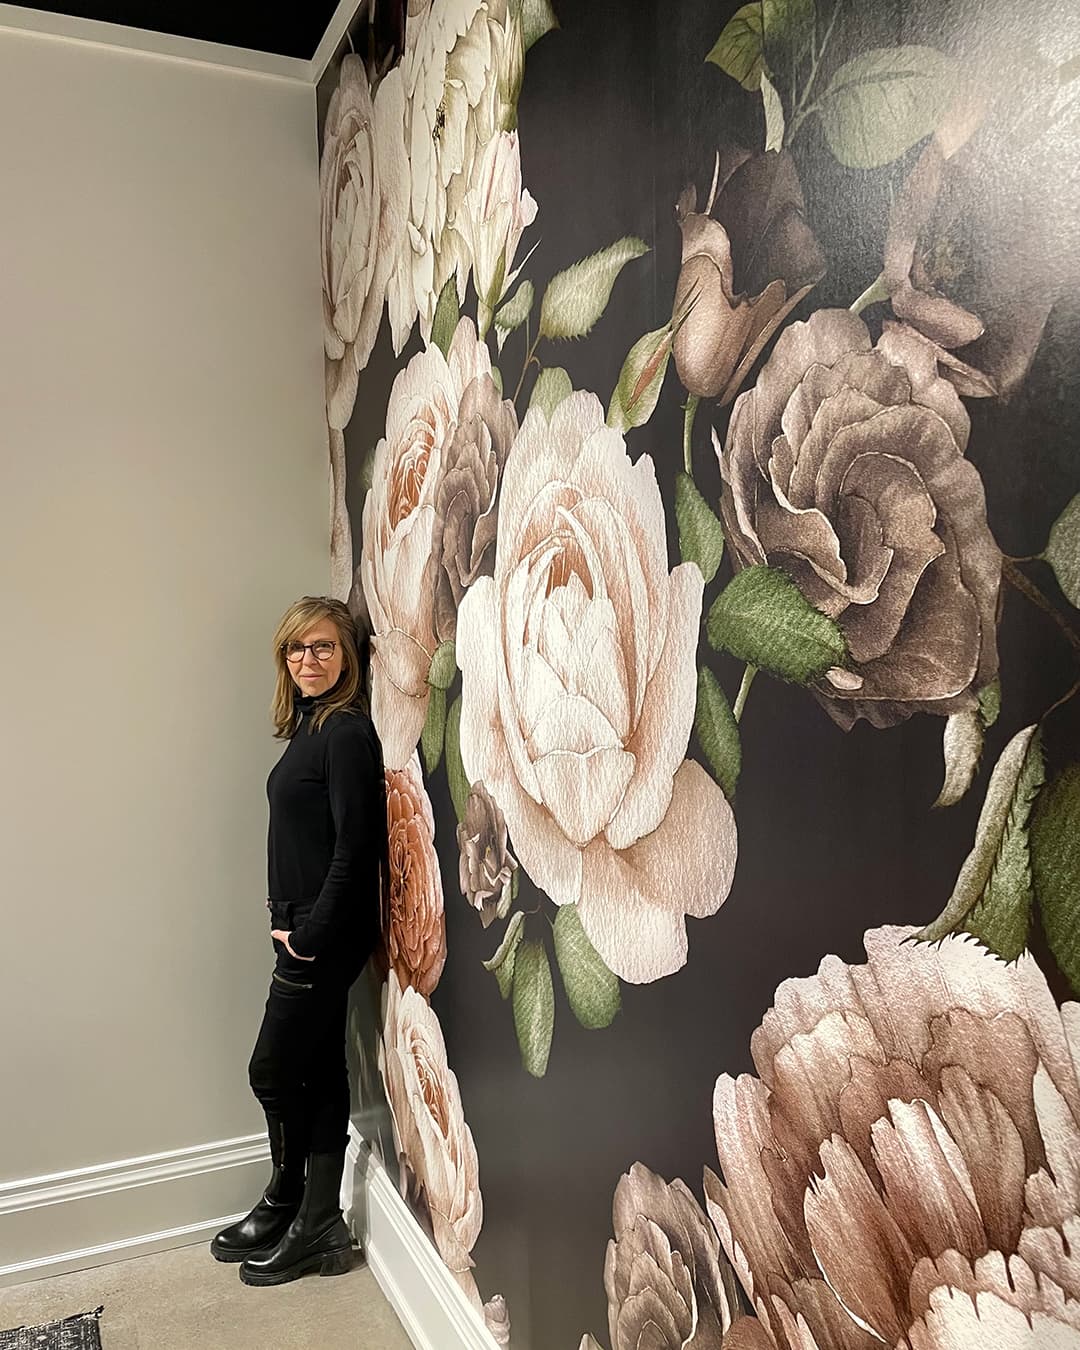 Jane Lockhart standing in front of wall mural